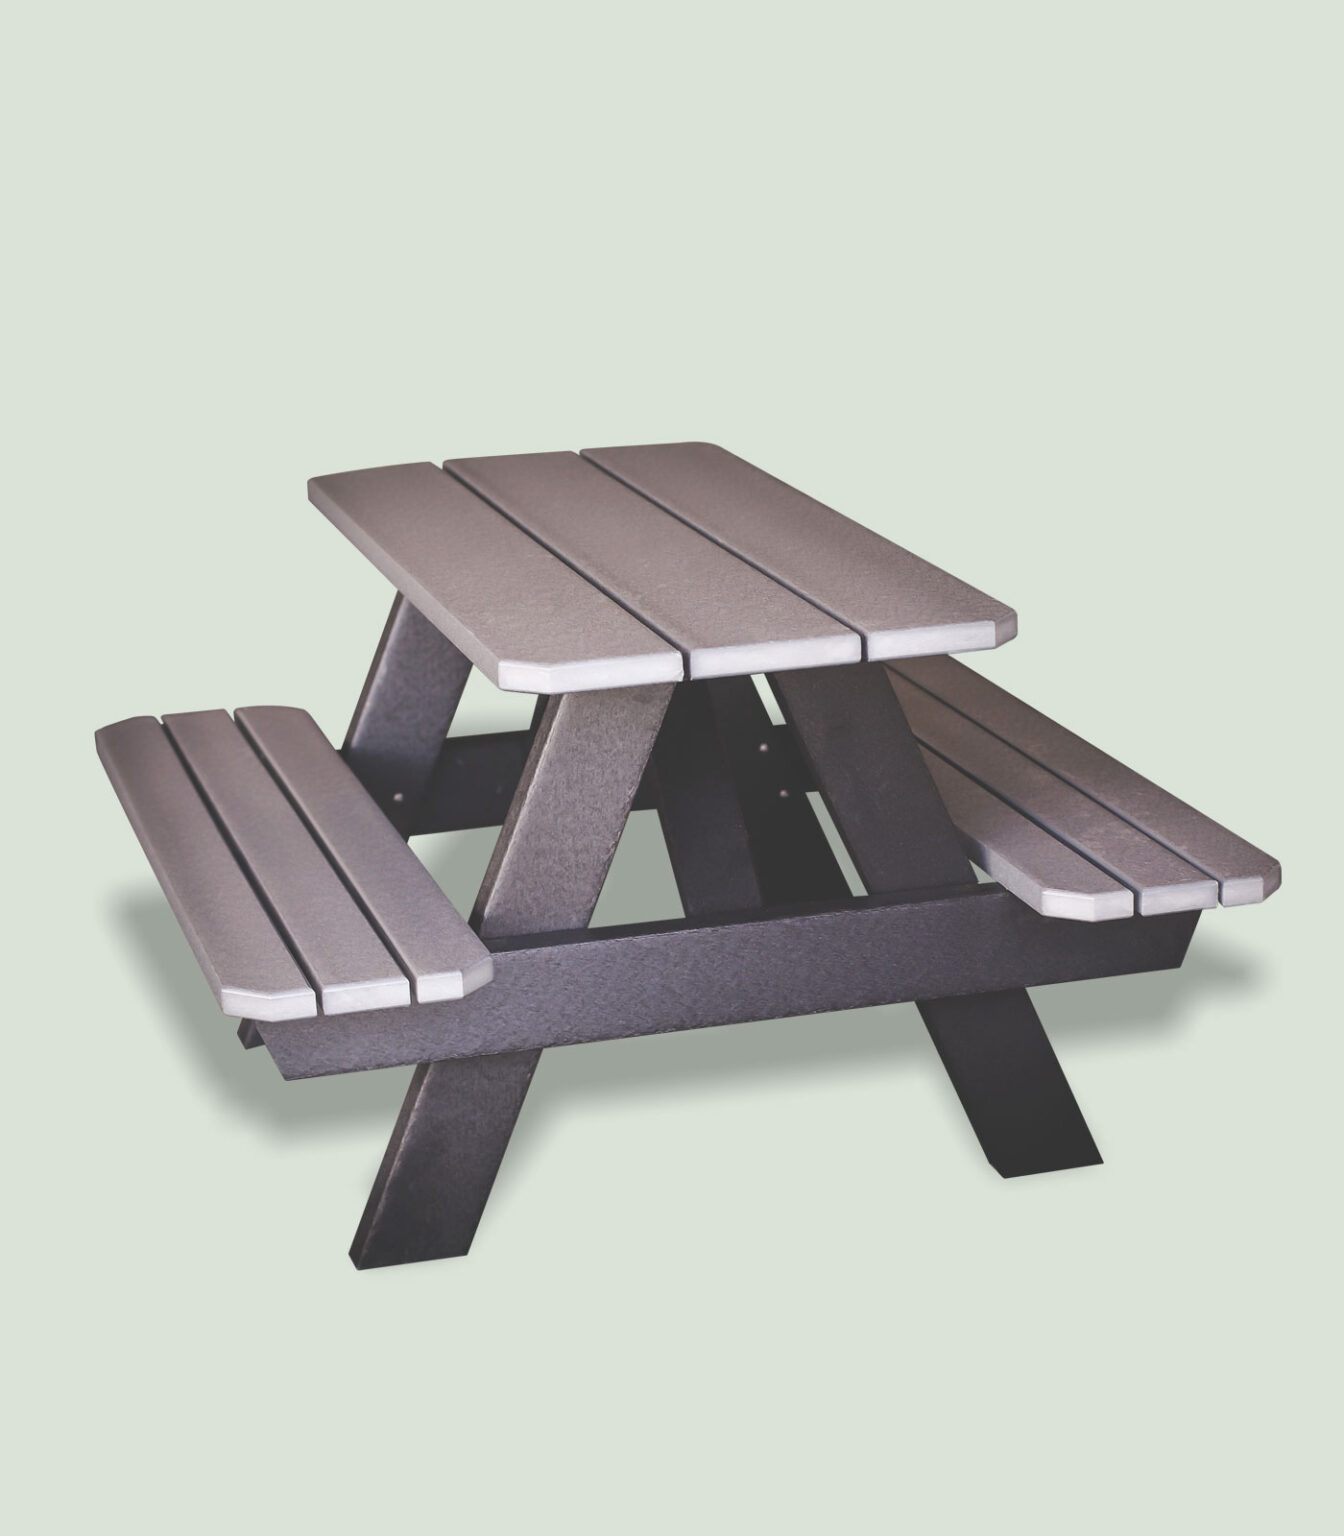 Top 5 Best Portable Picnic Tables in 2024